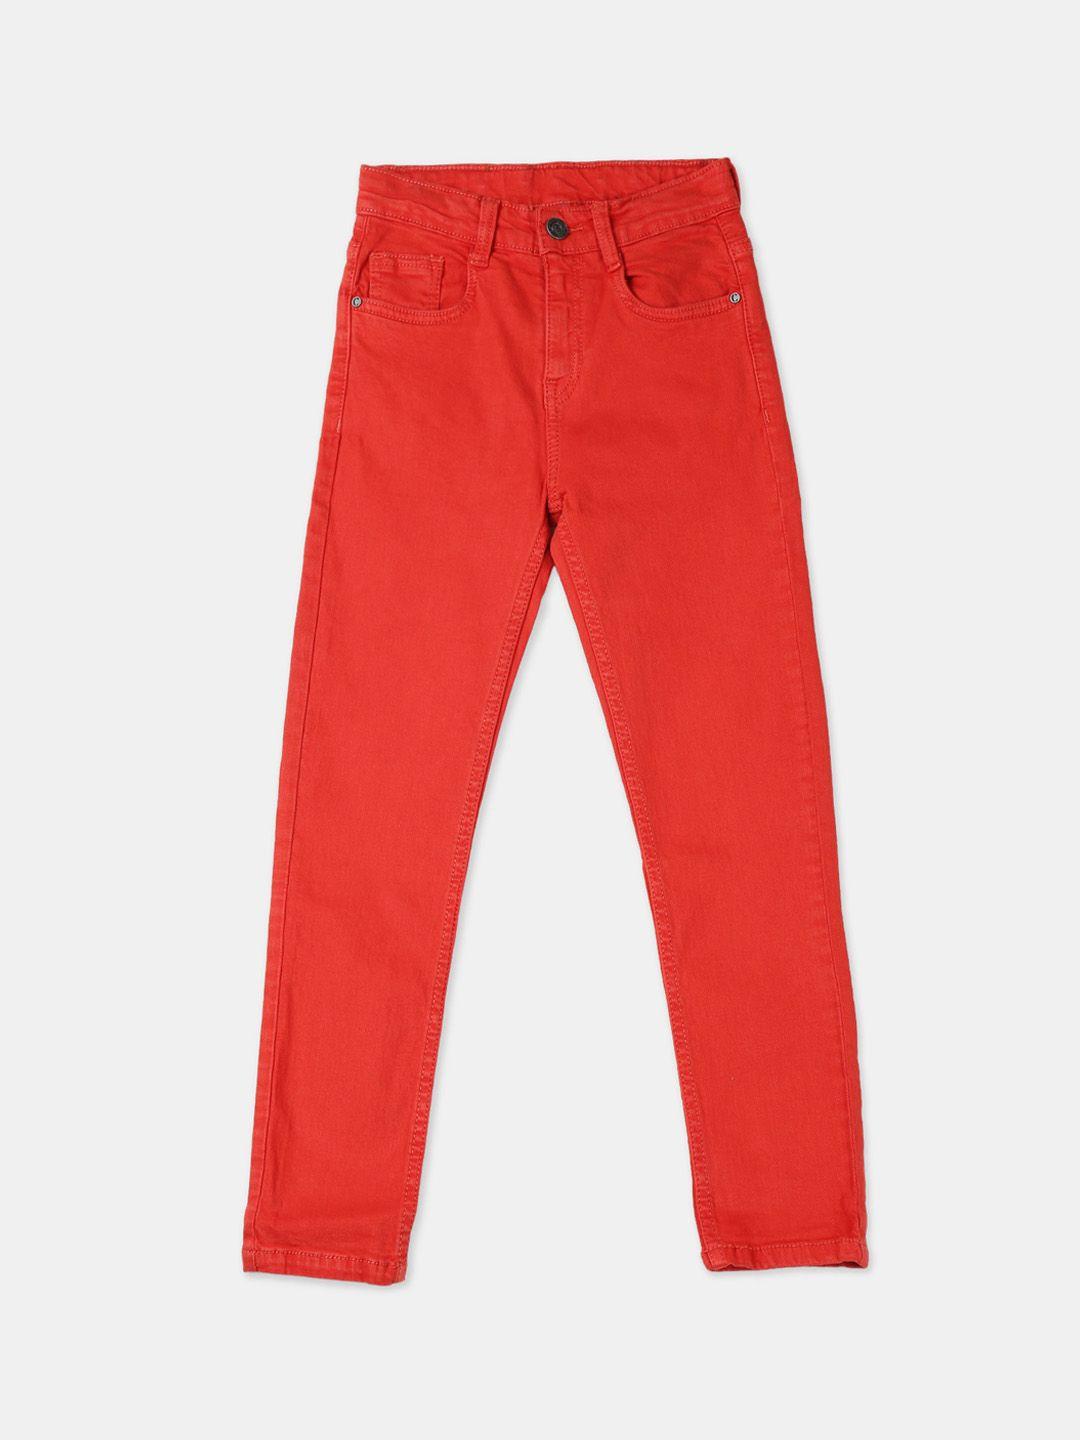 cherokee-boys-red-regular-fit-solid-colored-jeans